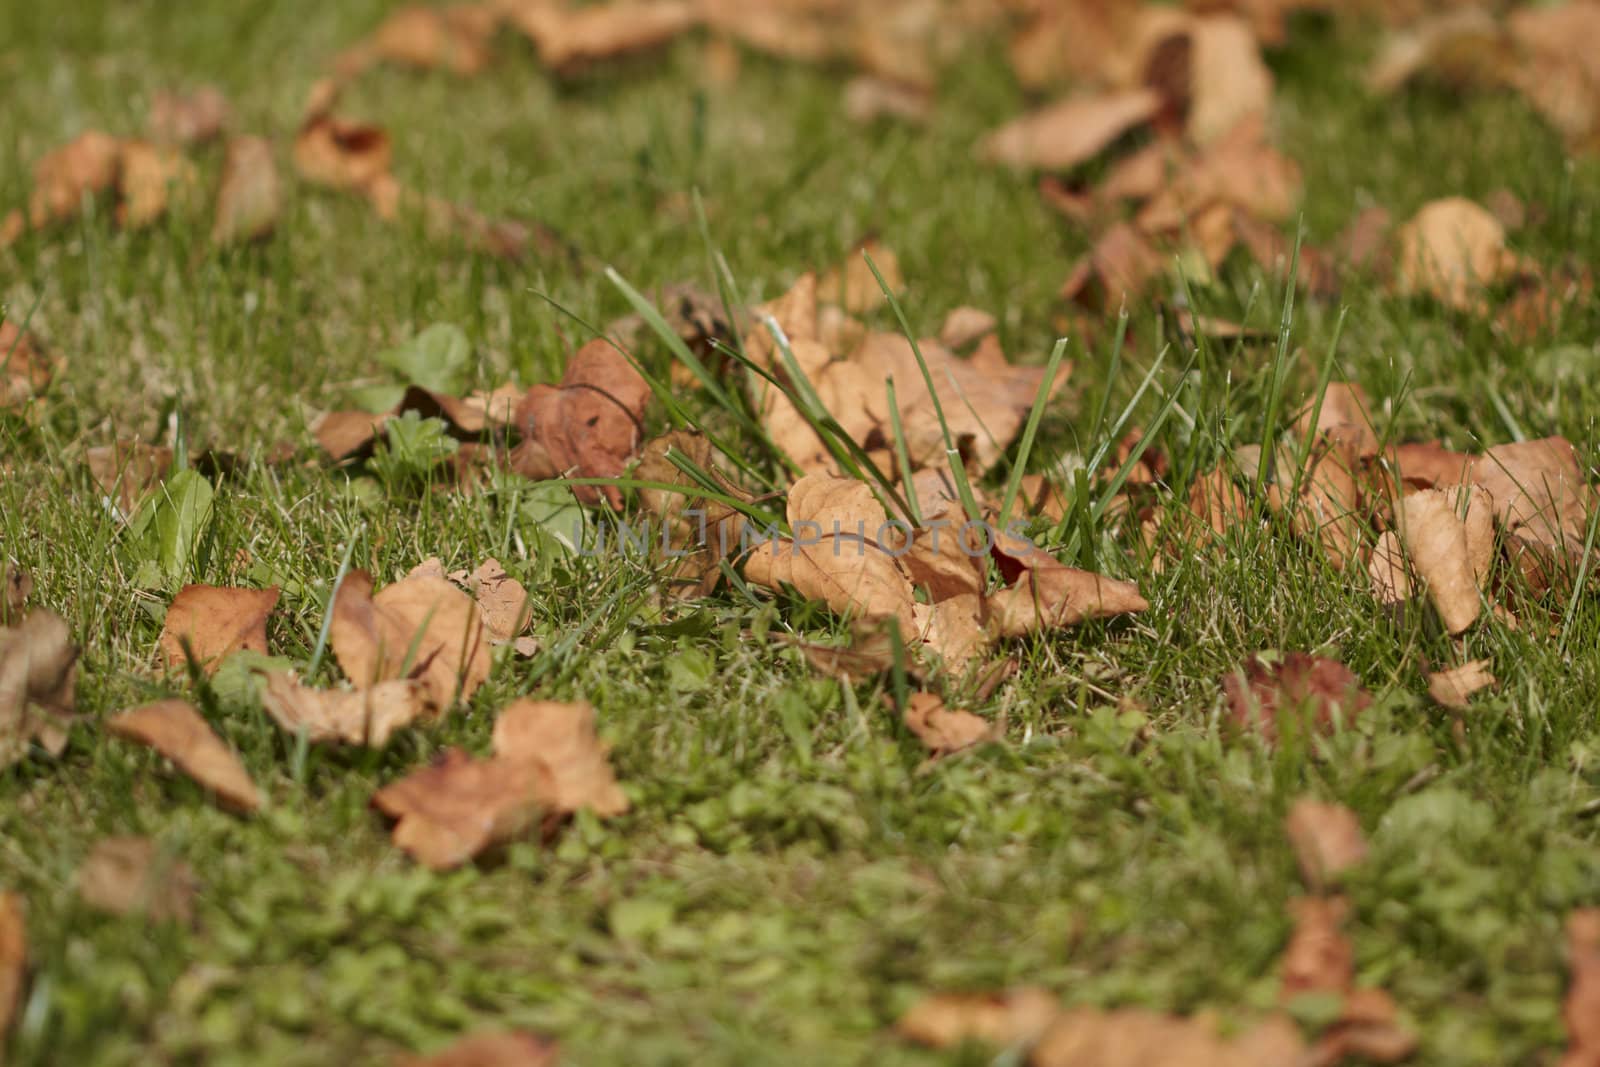 Autumn leaves on ground. Close up image